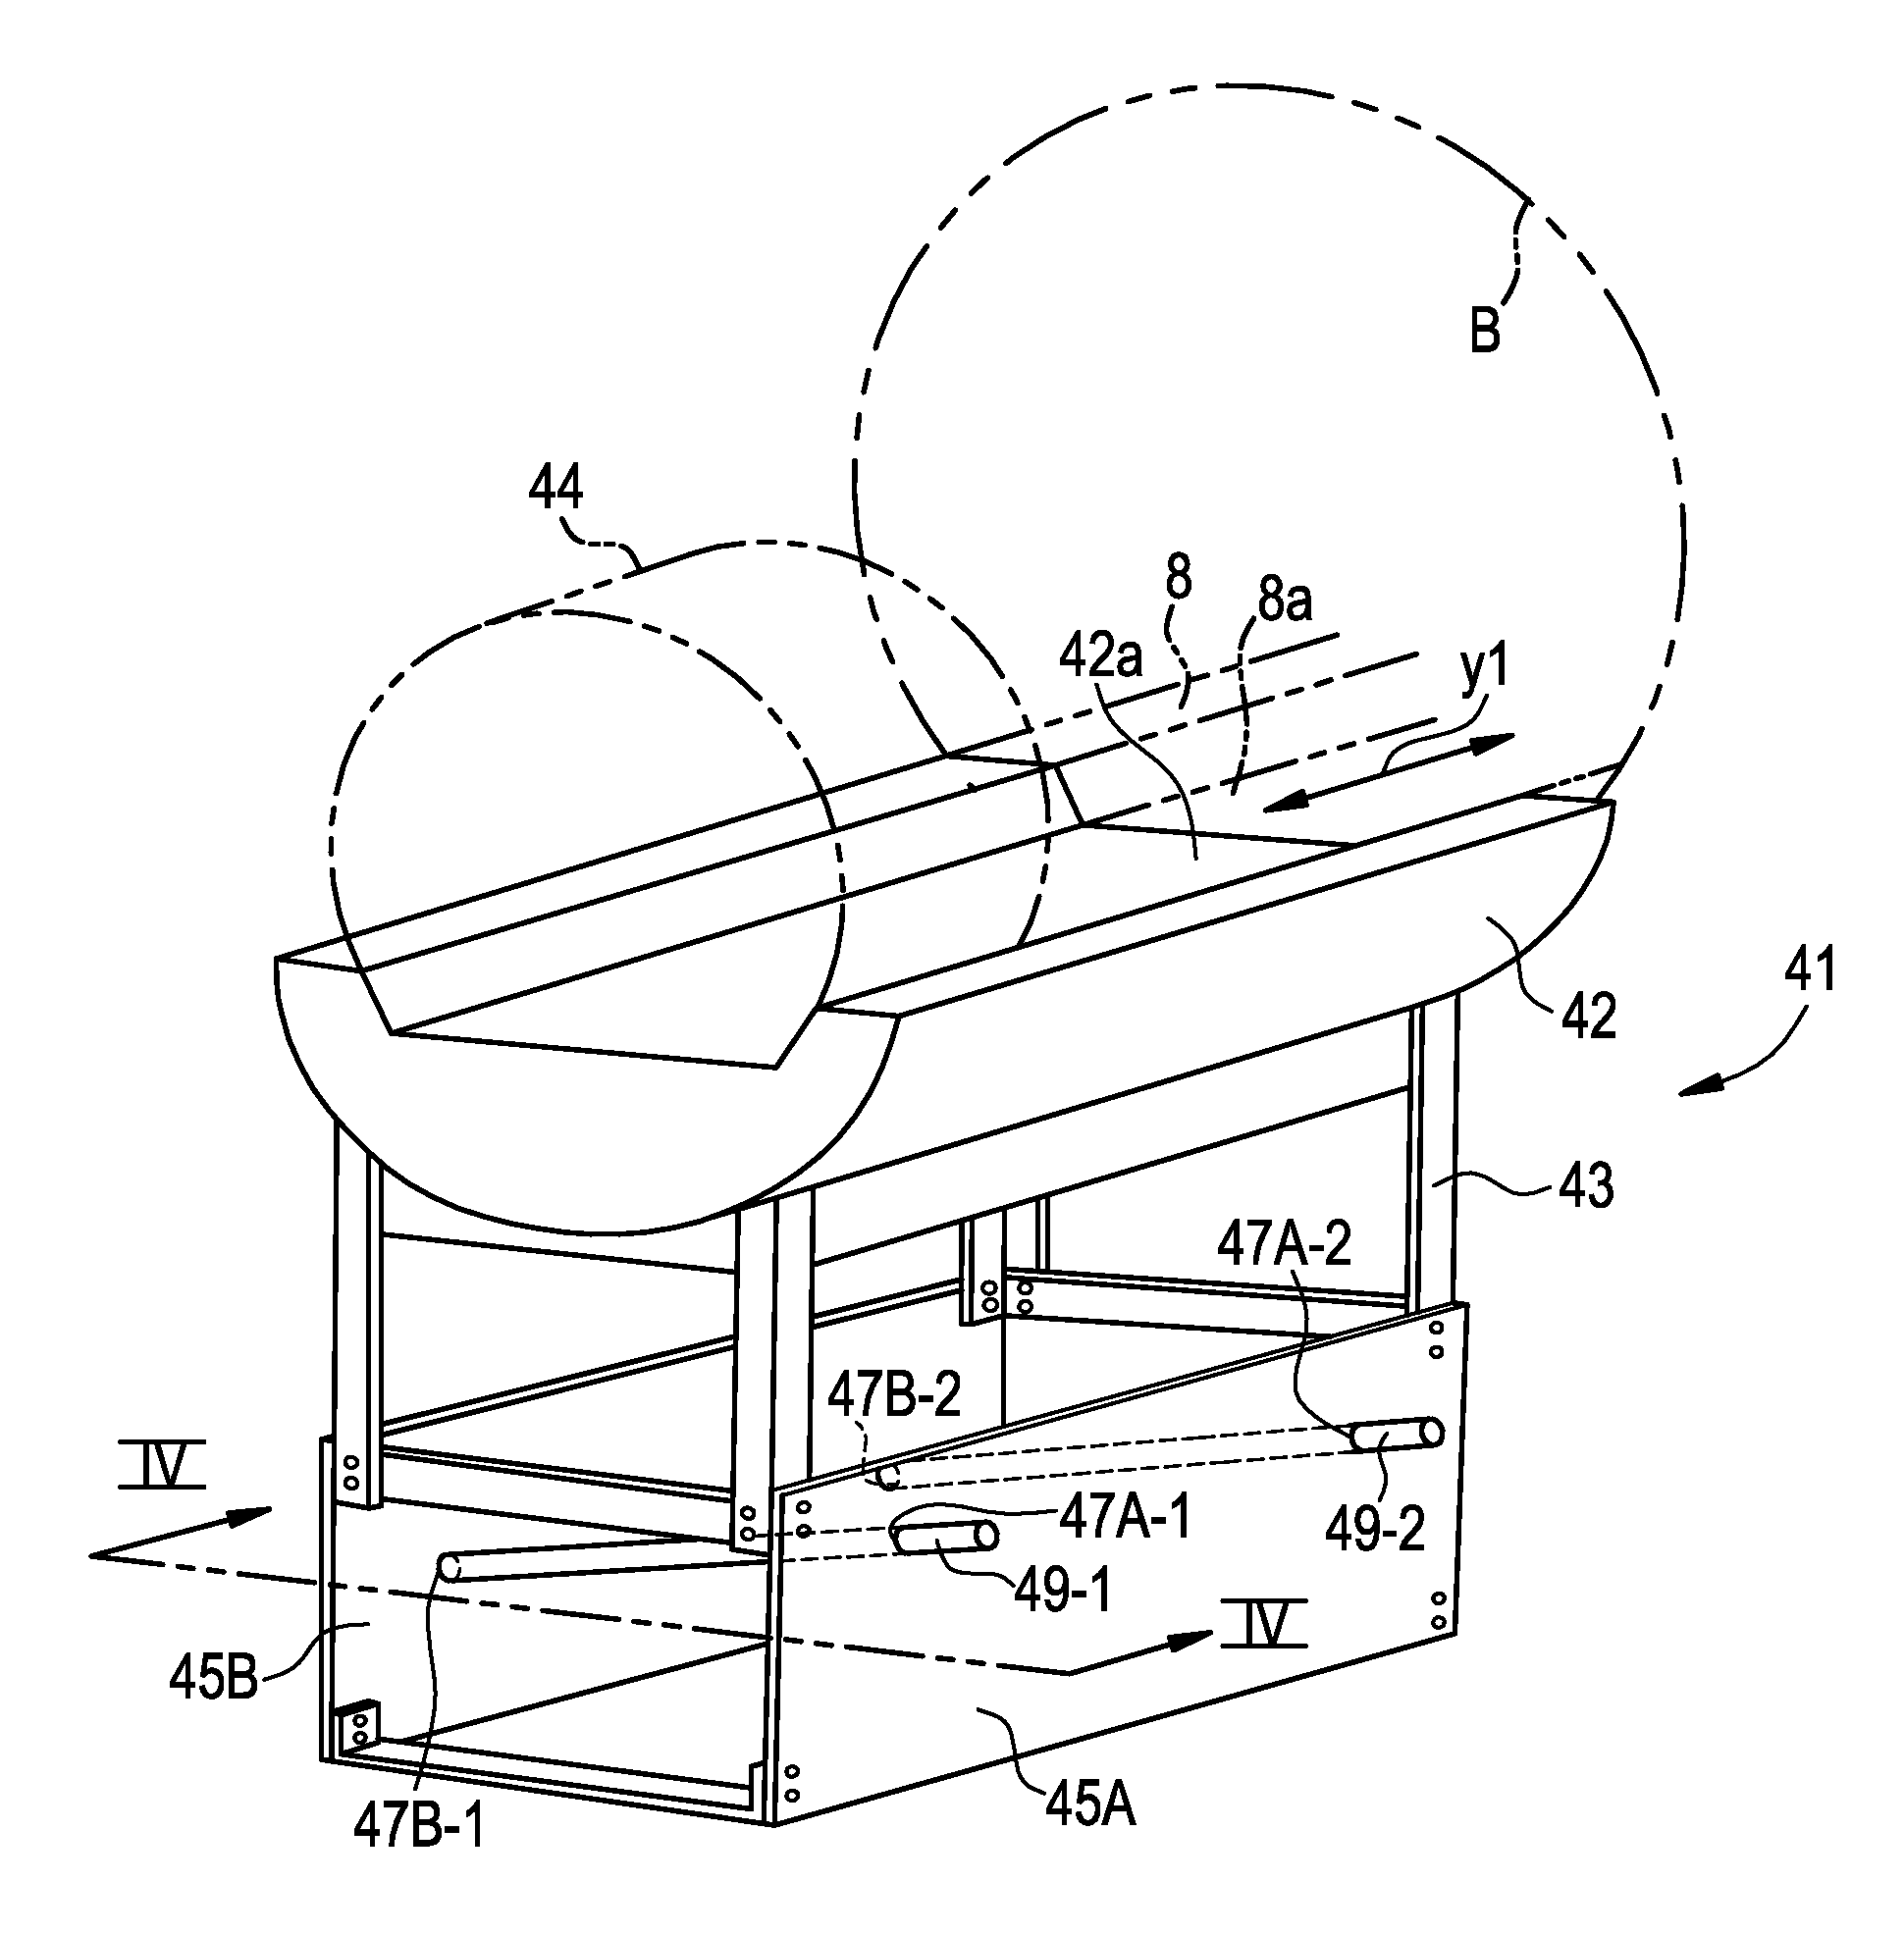 Magnetic resonance imaging apparatus and method of conveying the magnetic resonance imaging apparatus